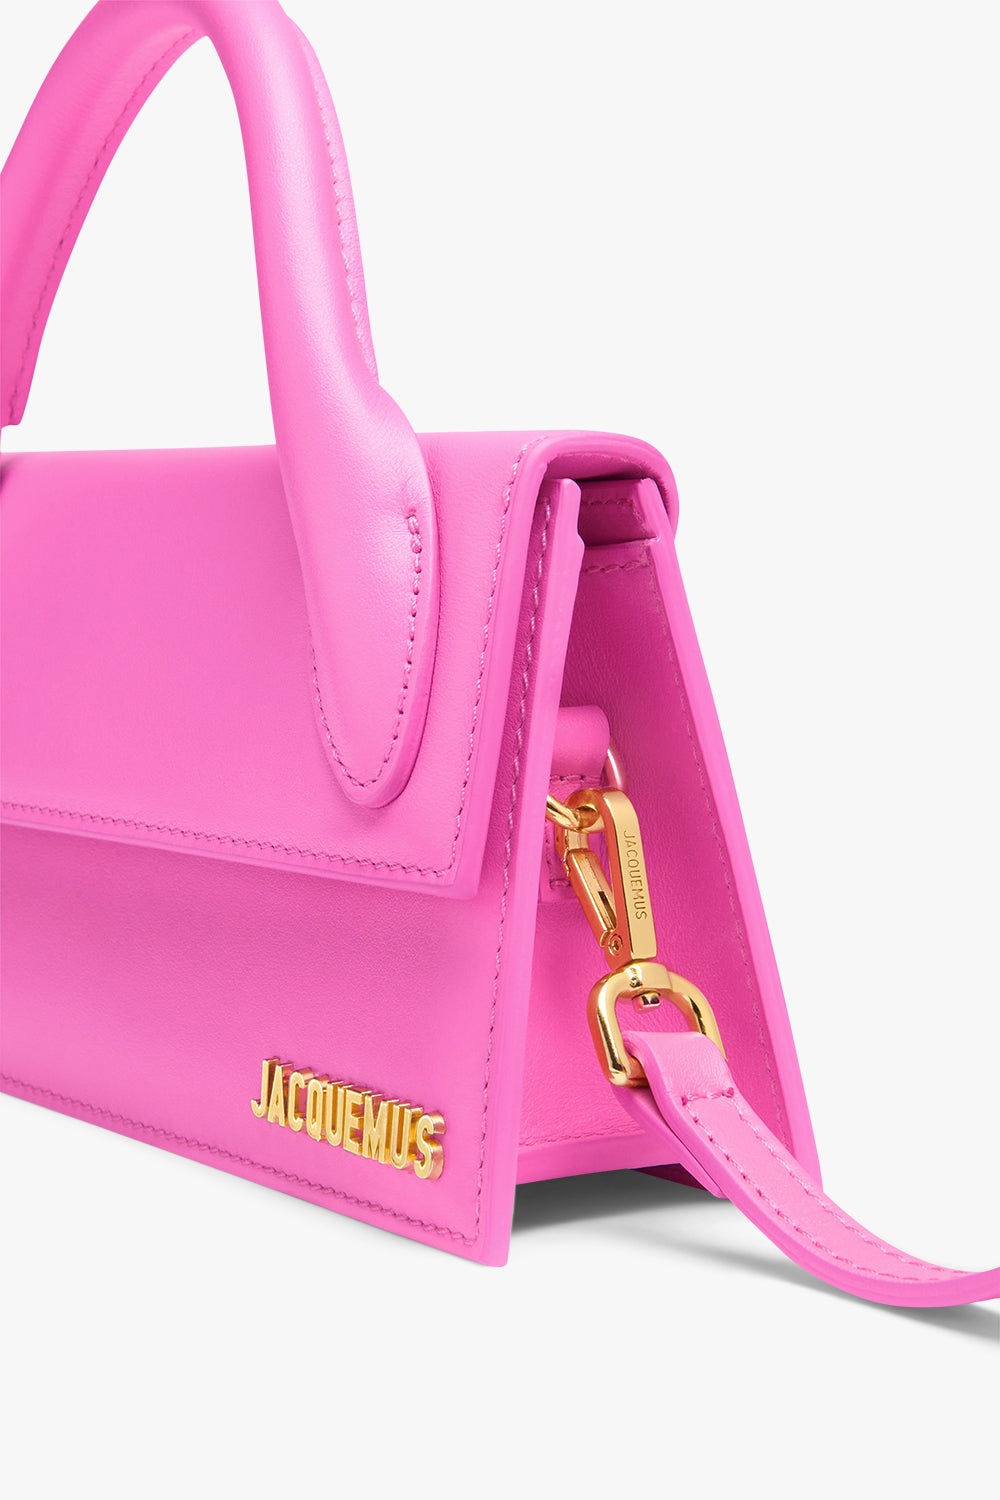 LE CHIQUITO LONG BAG | NEON PINK - 4